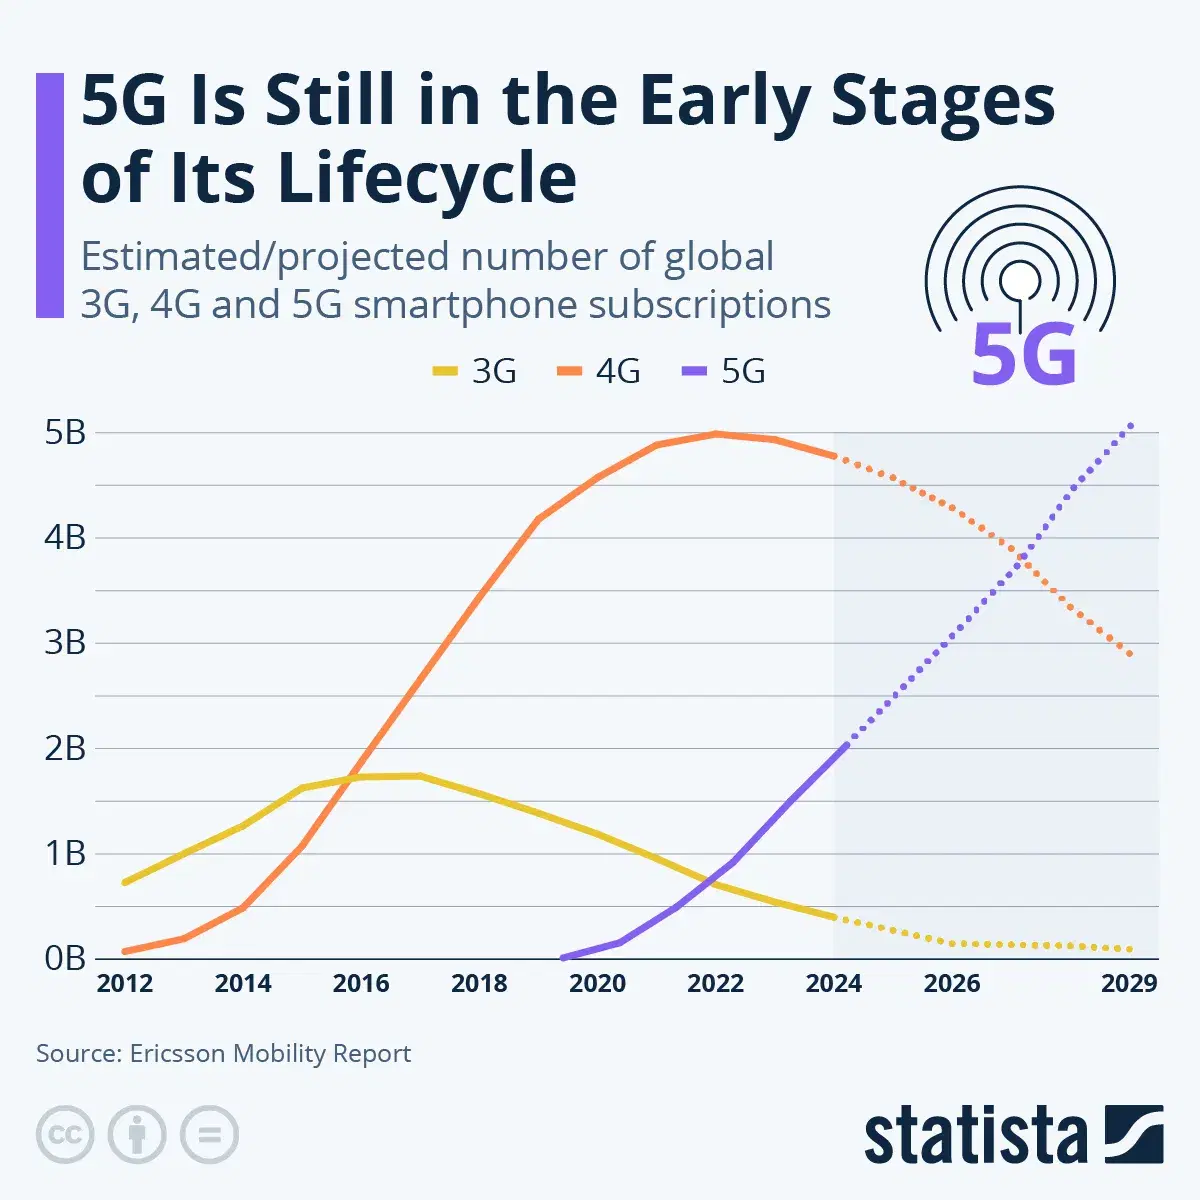 5G Is Still in the Early Stages of Its Lifecycle